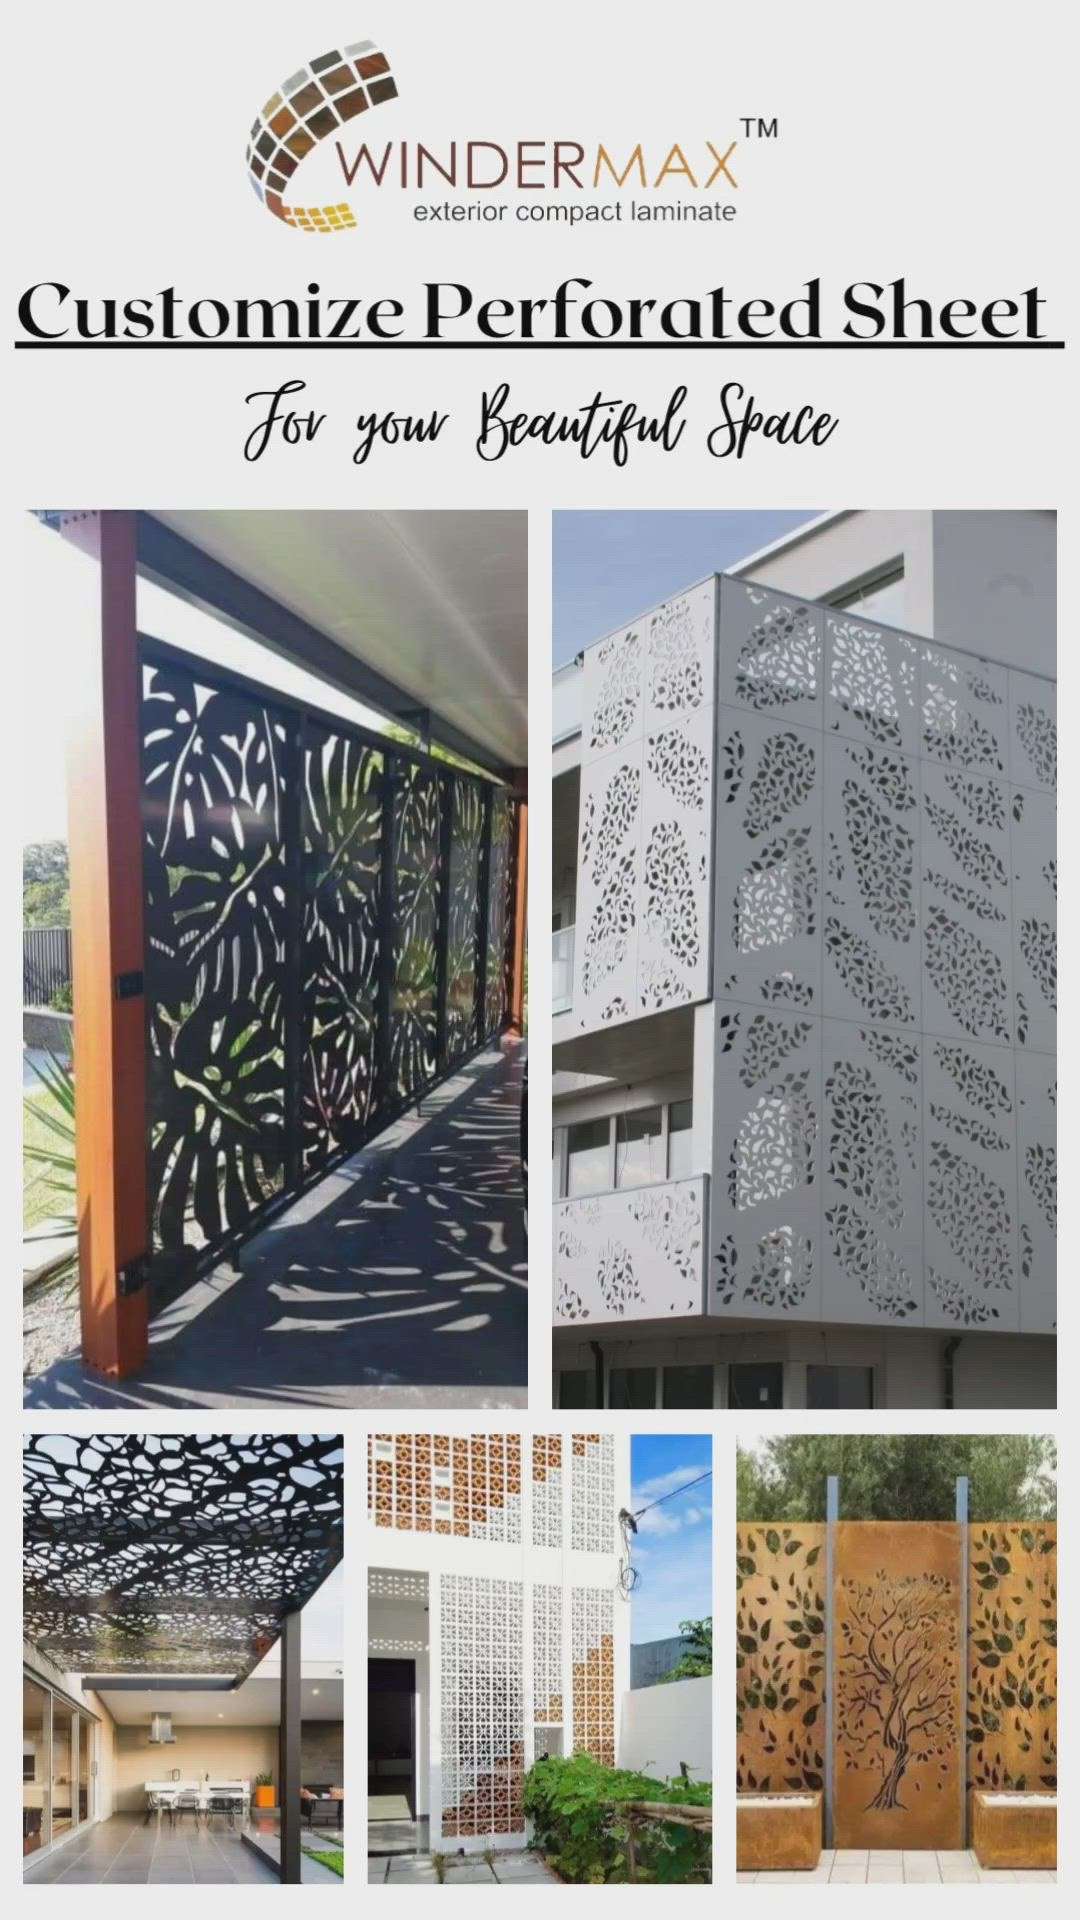 Customize Perforated sheet for your beautiful space 
.
Interior and exterior products available in wholesale prices  

Our Product details 

Metal exterior wall cladding
HPL High pressure laminate
ACL Aluminum composite louvers 
Solid aluminium louvers
WPC louvers
Wall FINs 
ACP Aluminium composite panel
ACP/HPL Colour rivets
Shed fabrication 
.
.
#cnc #homeelevation #manufacturing #building #engineering #homedecor #architect #sheet #cncmachine #design #interior #exterior #fabrication #cncrouter #perforatedsheet #cncmachinist #tools #metalworking #cncmill #metal #lasercutting #welding #machine #laser #cncwoodworking #elevation

For more details our all products please visit websites
www.windermaxindia.com
www.indianmake.co.in 
or call us on 
8882291670 9810980278

Regards
Windermax India